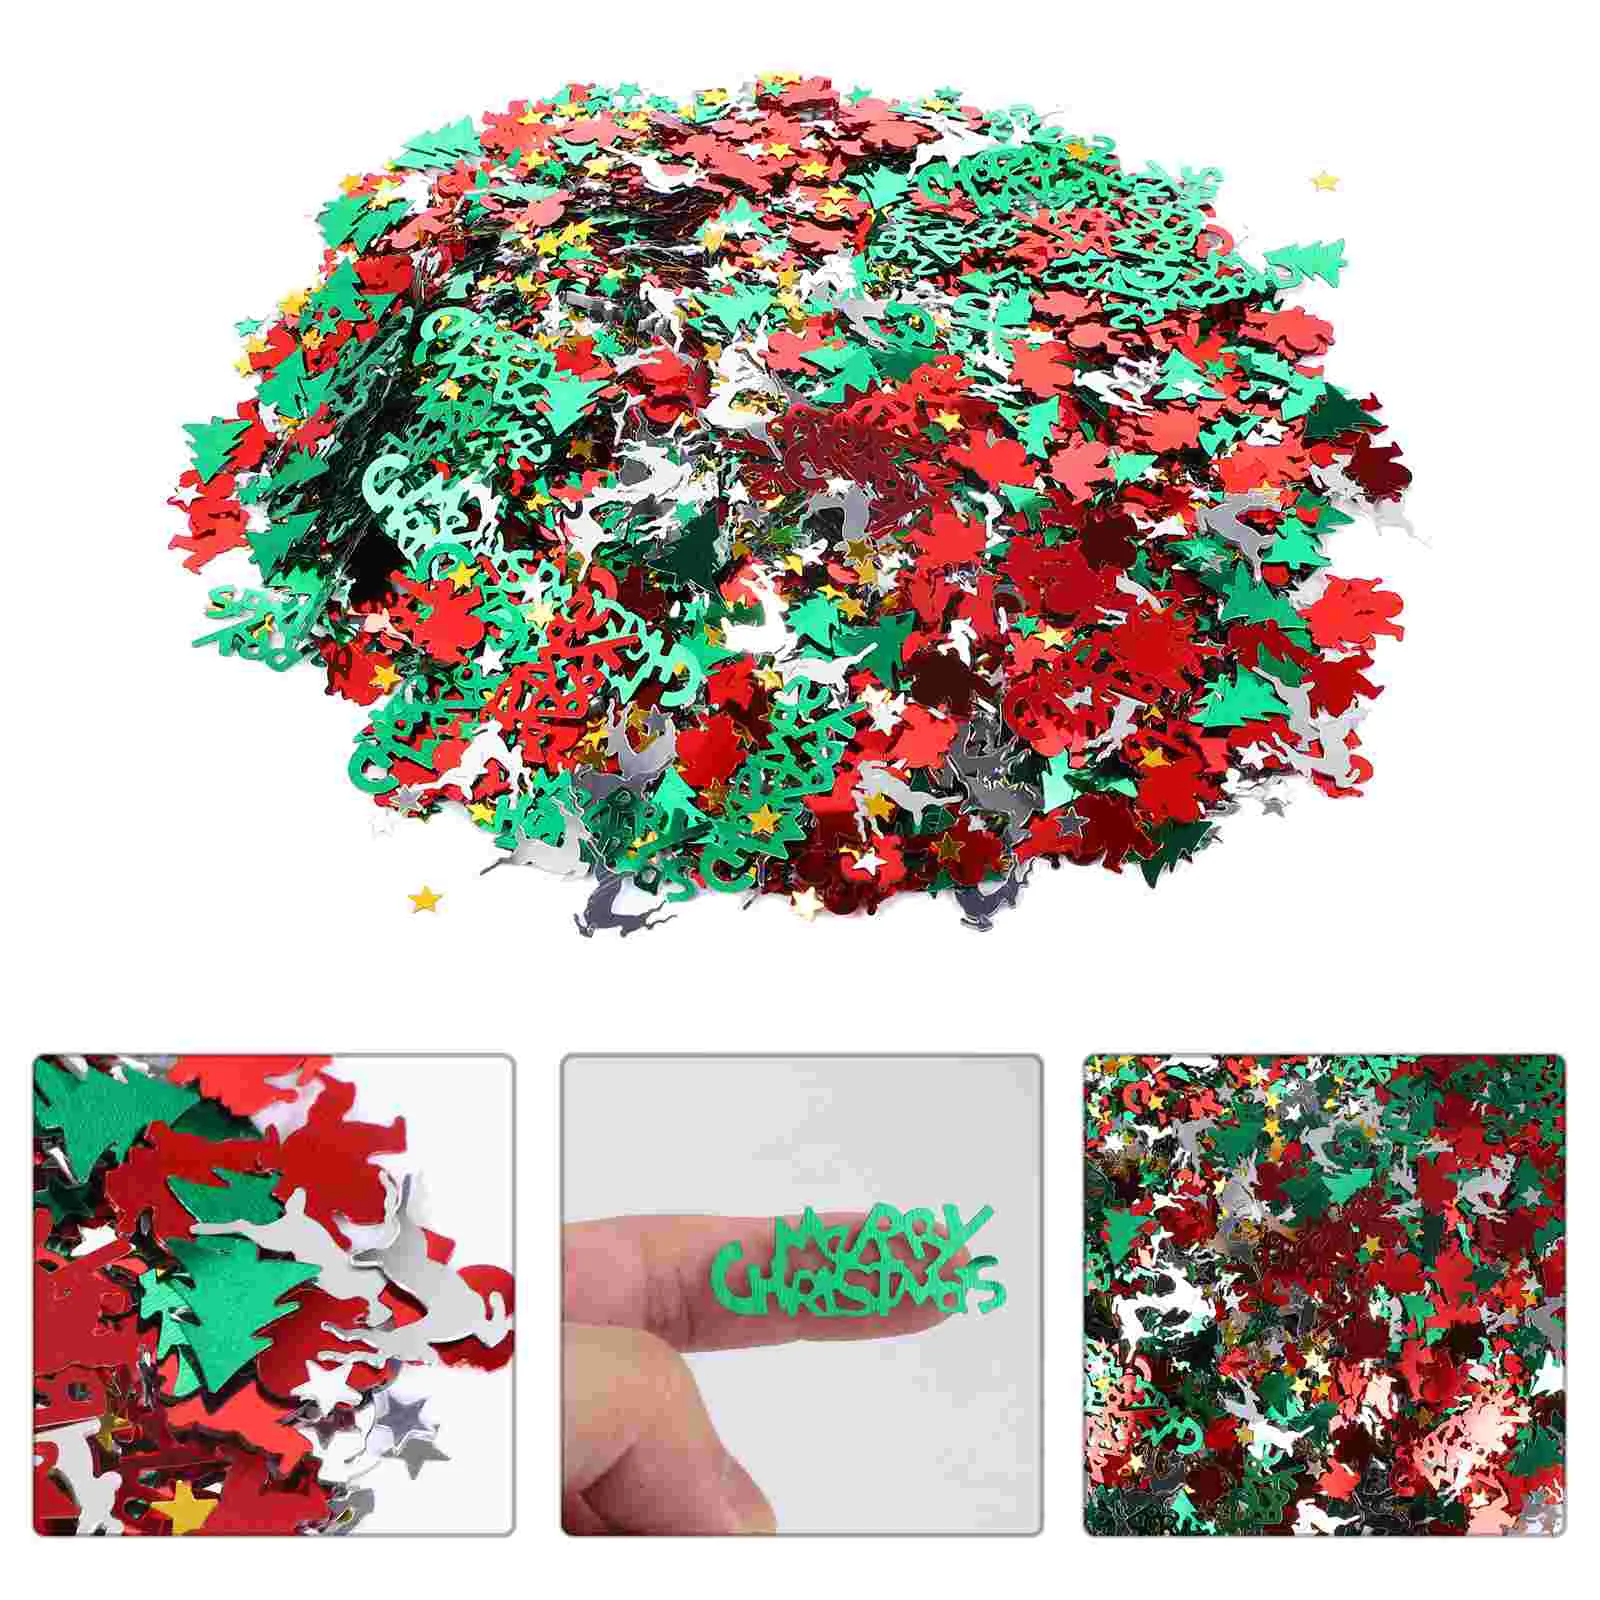 

Christmas Confetti Xmas Tree Beautiful Decorations DIY Creative Ornaments Party Photo Props Delicate Self Made Crafted Decors